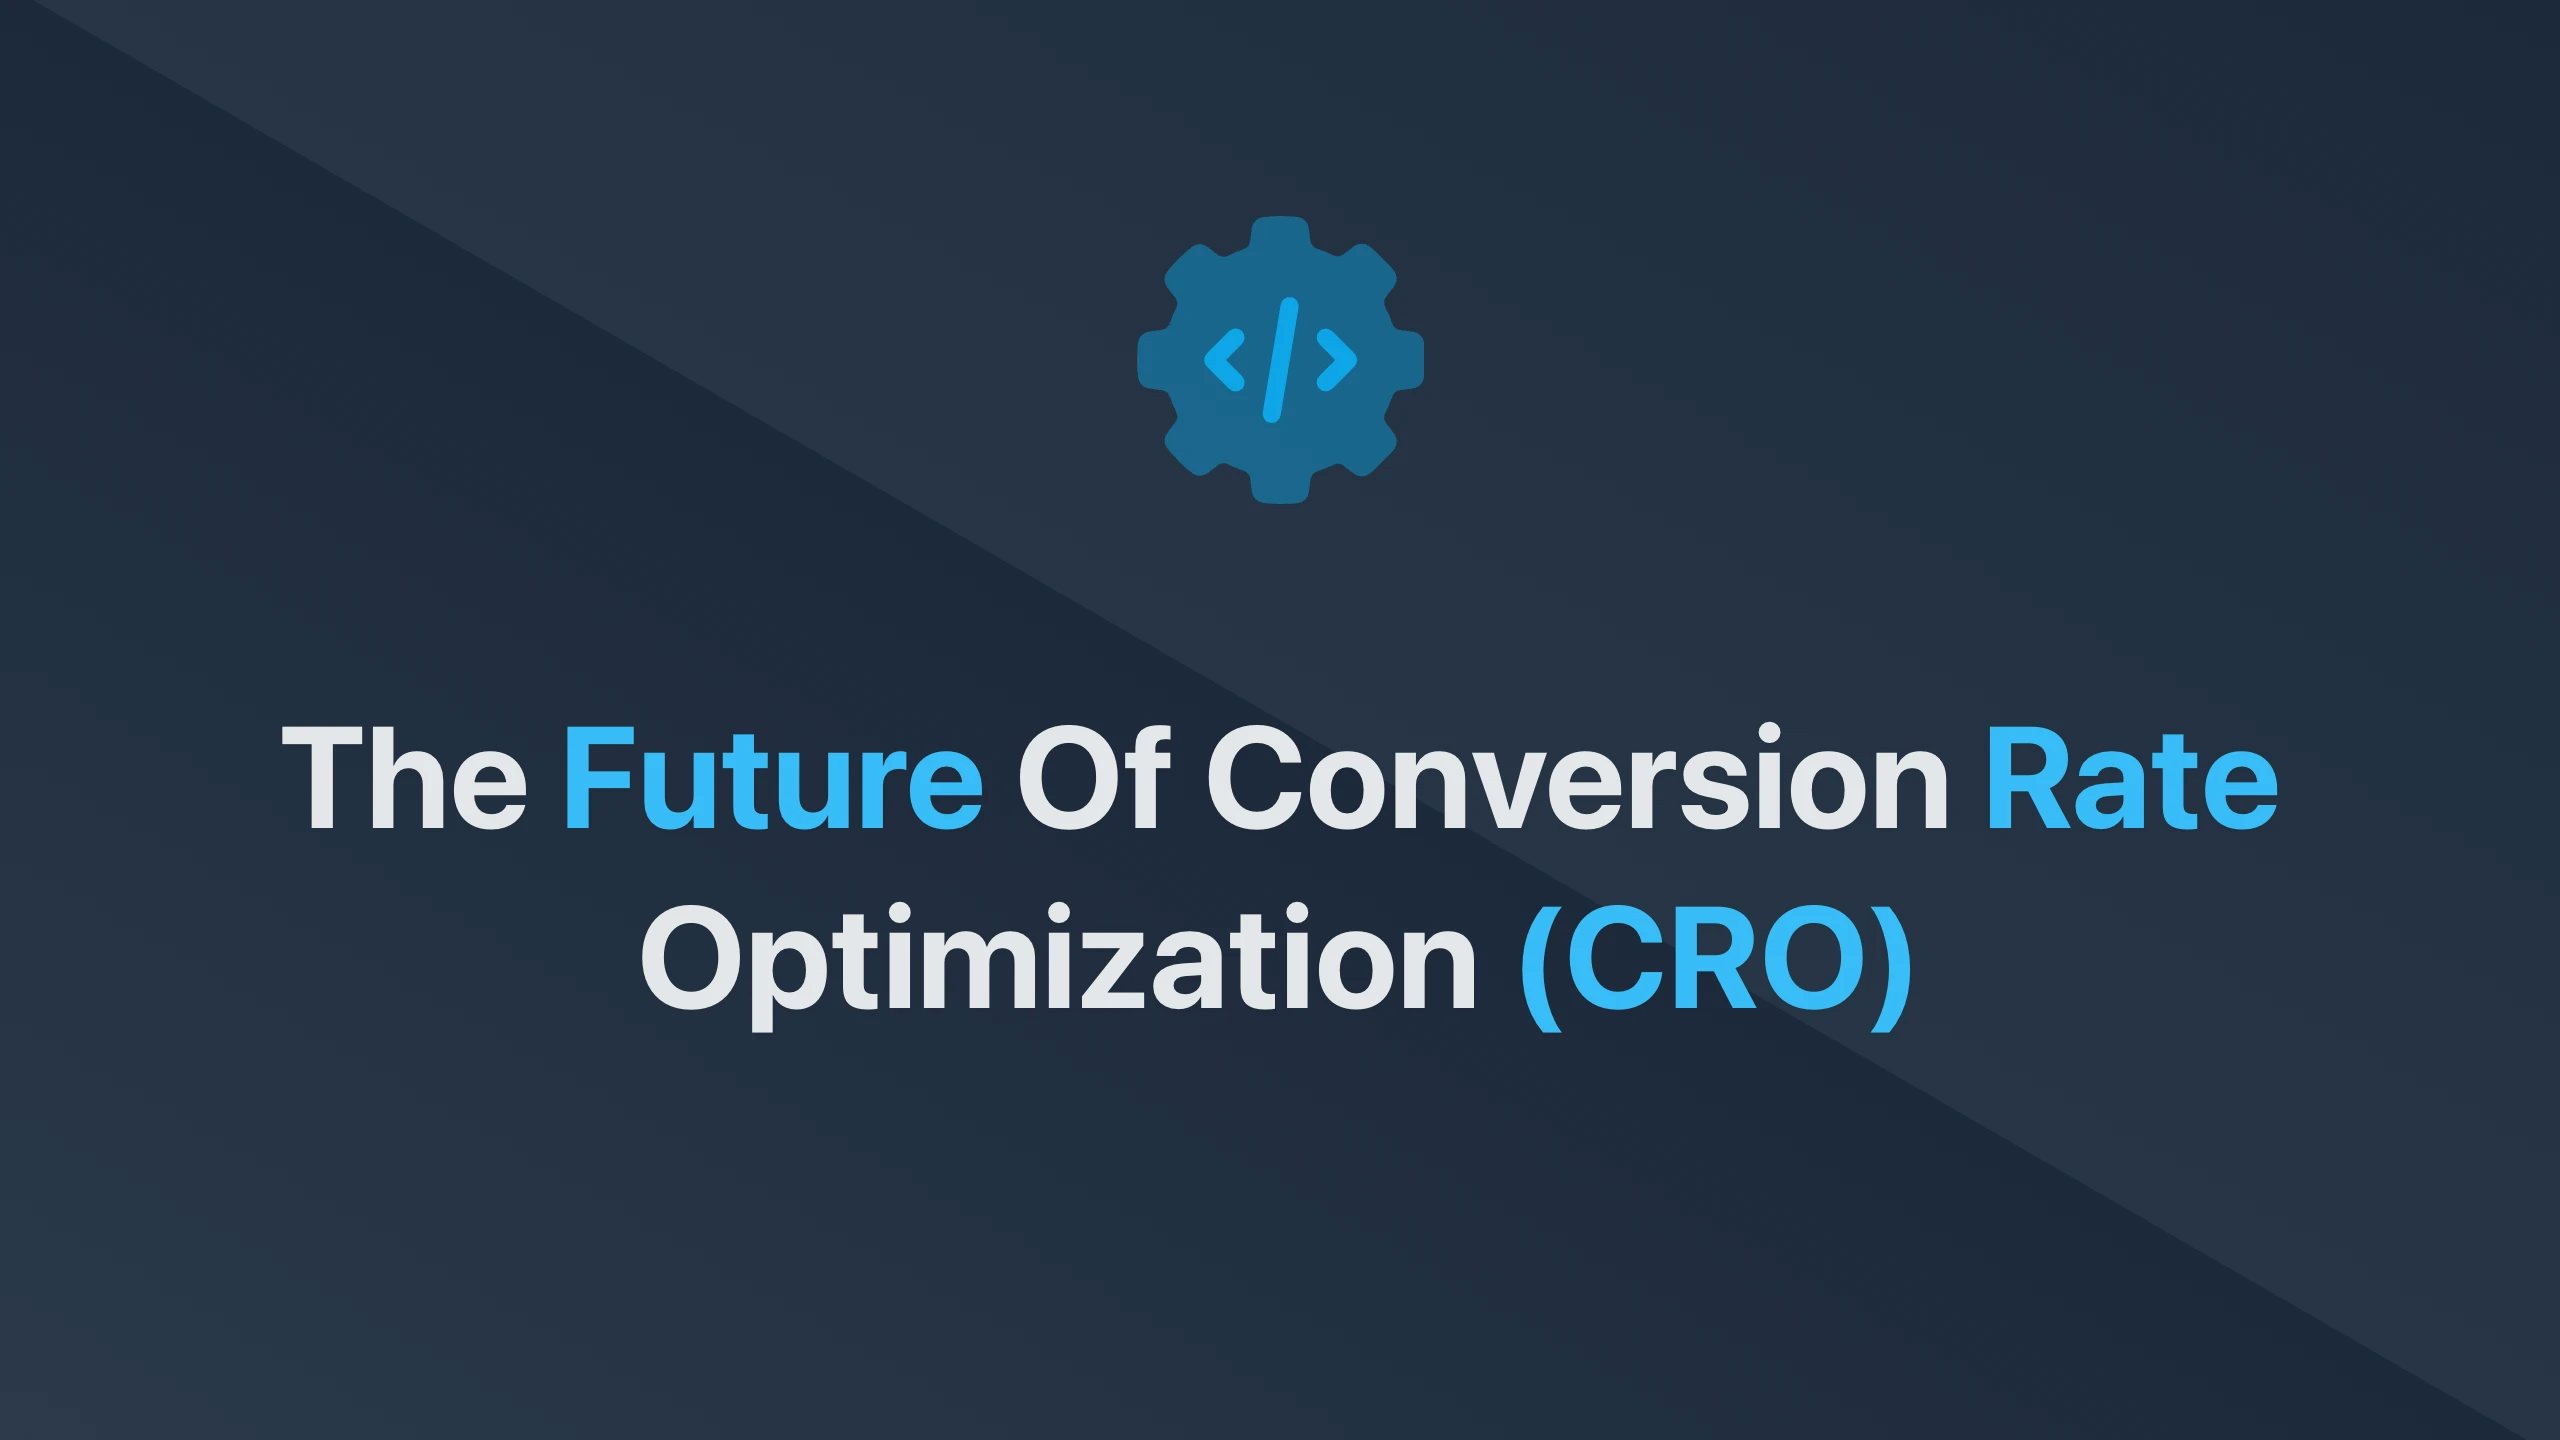 Cover Image for The Future of Conversion Rate Optimization (CRO)